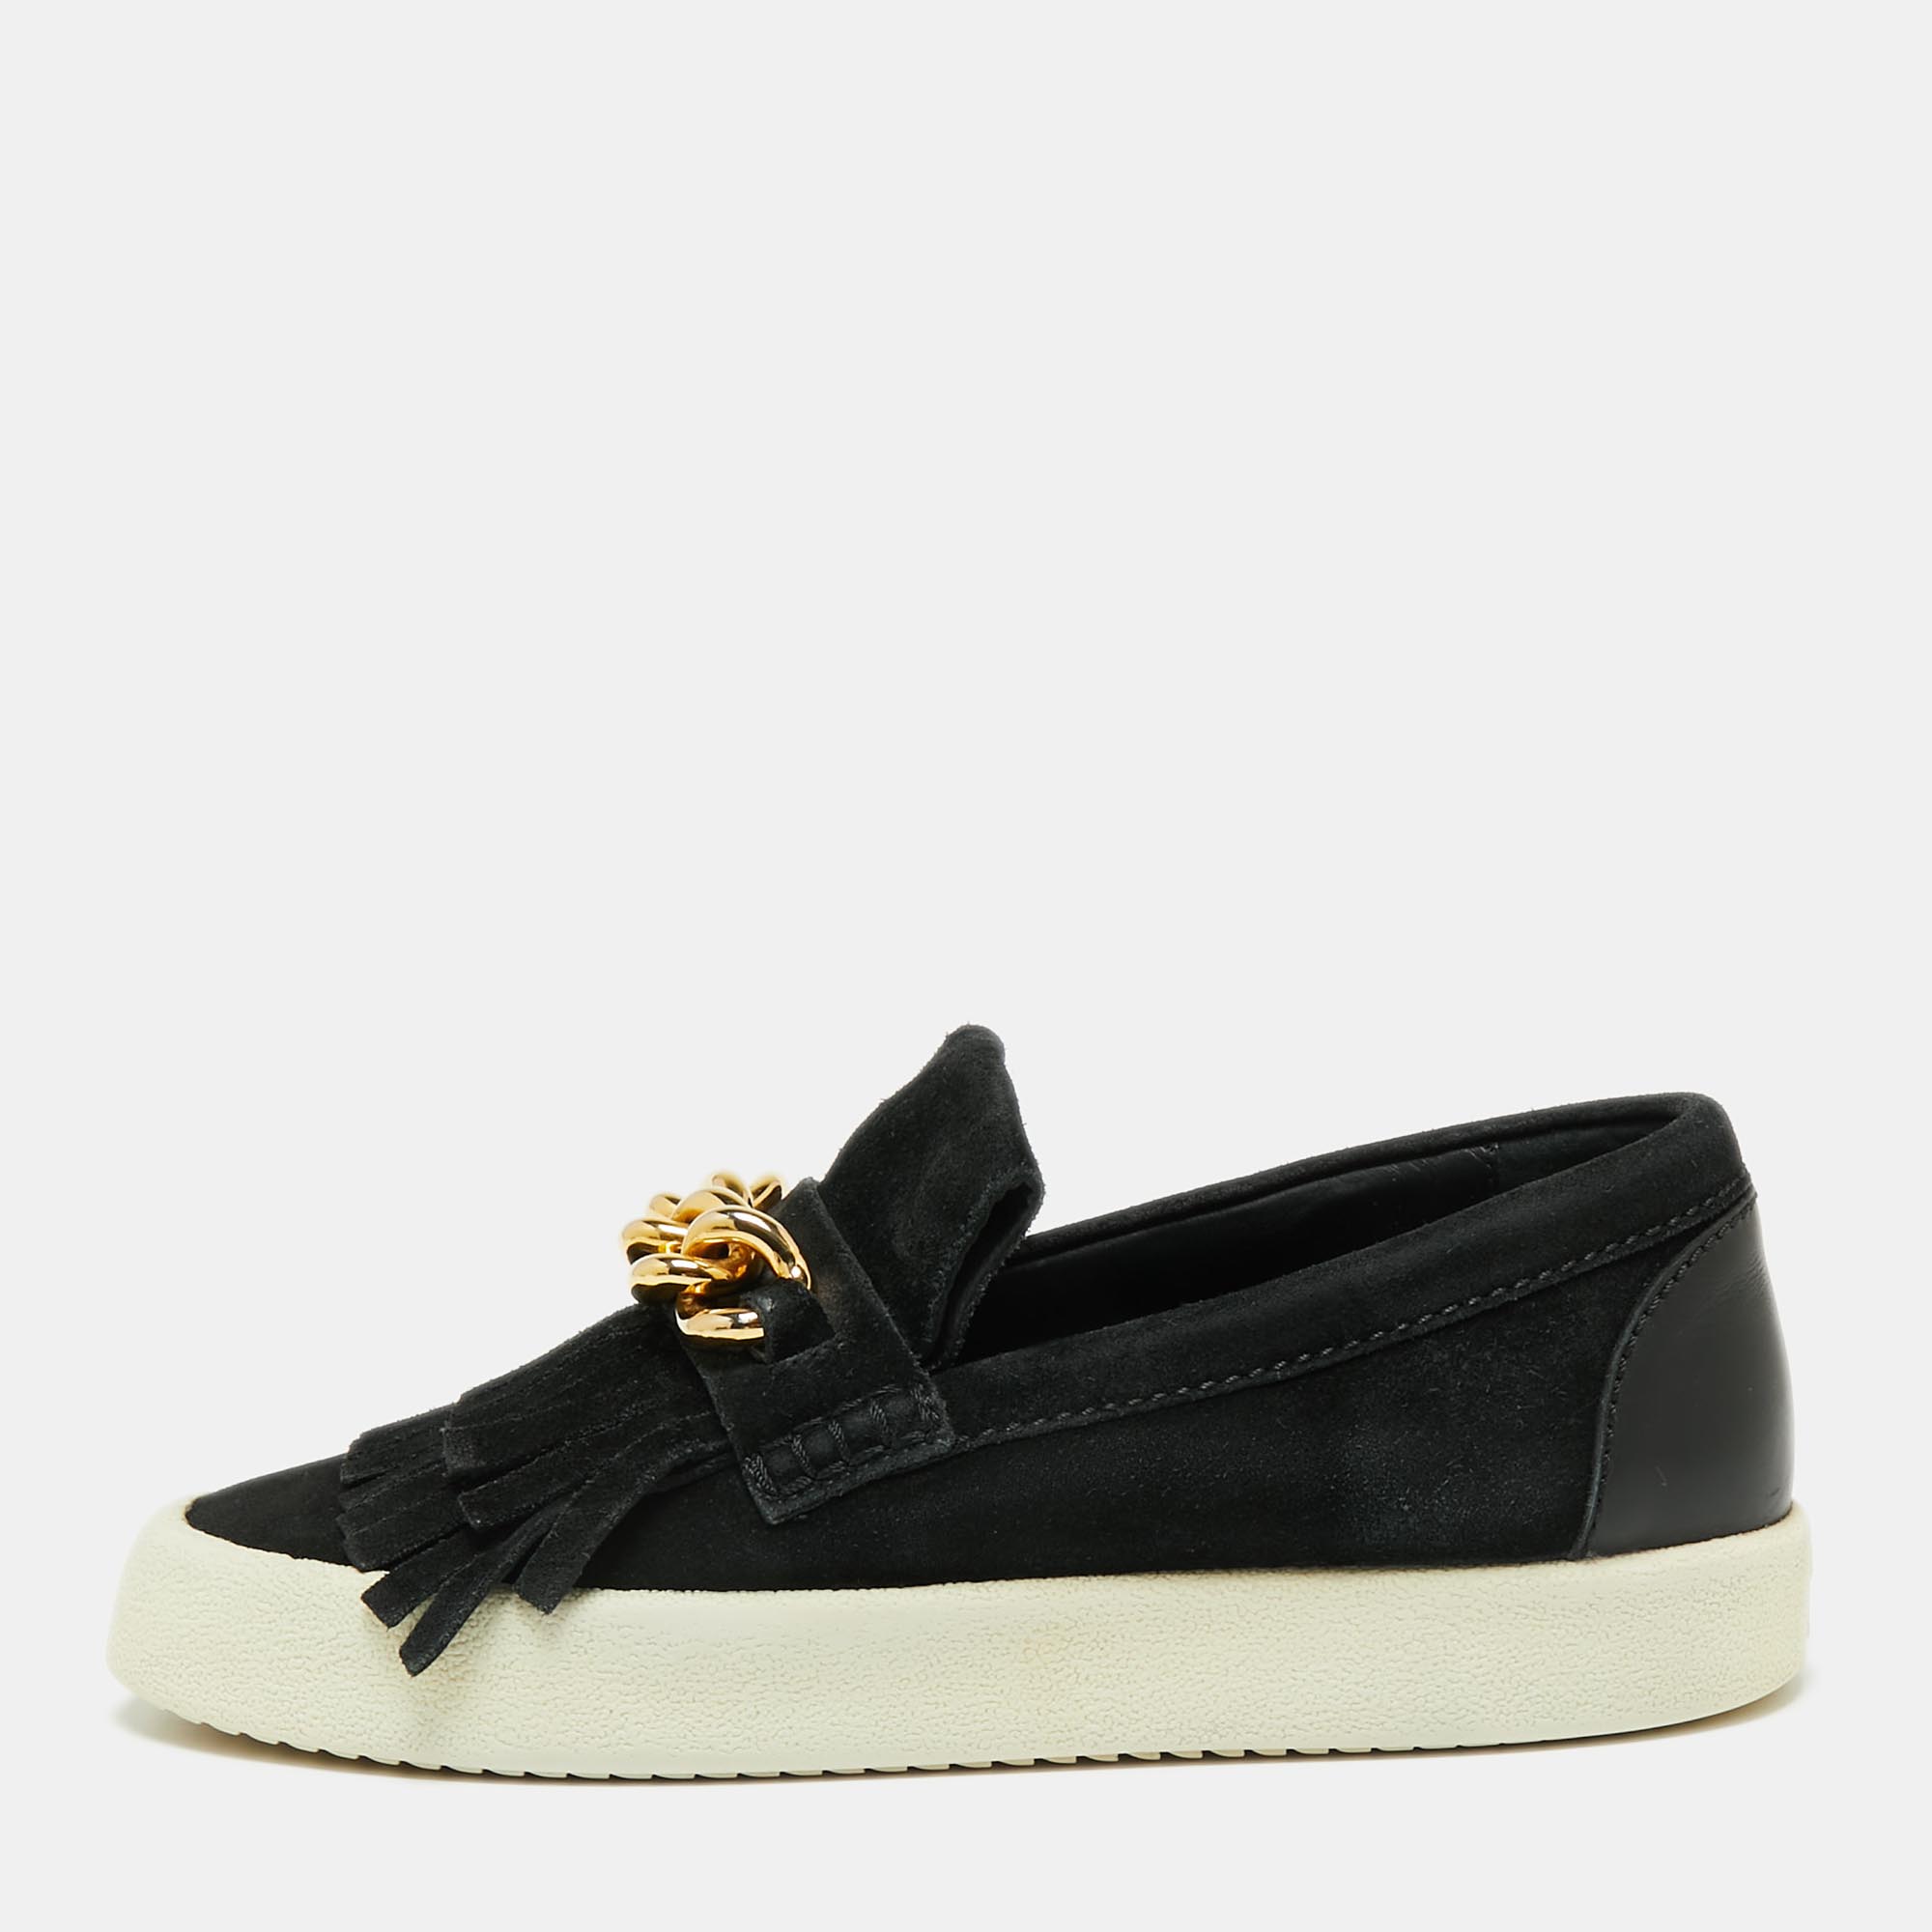 These slip on sneakers from Giuseppe Zanotti are effortlessly cool and amazingly stylish. Brimming with fabulous details these black sneakers are crafted from suede and designed with fringe detailing and chains on the uppers. The modern style makes these sneakers a must buy.